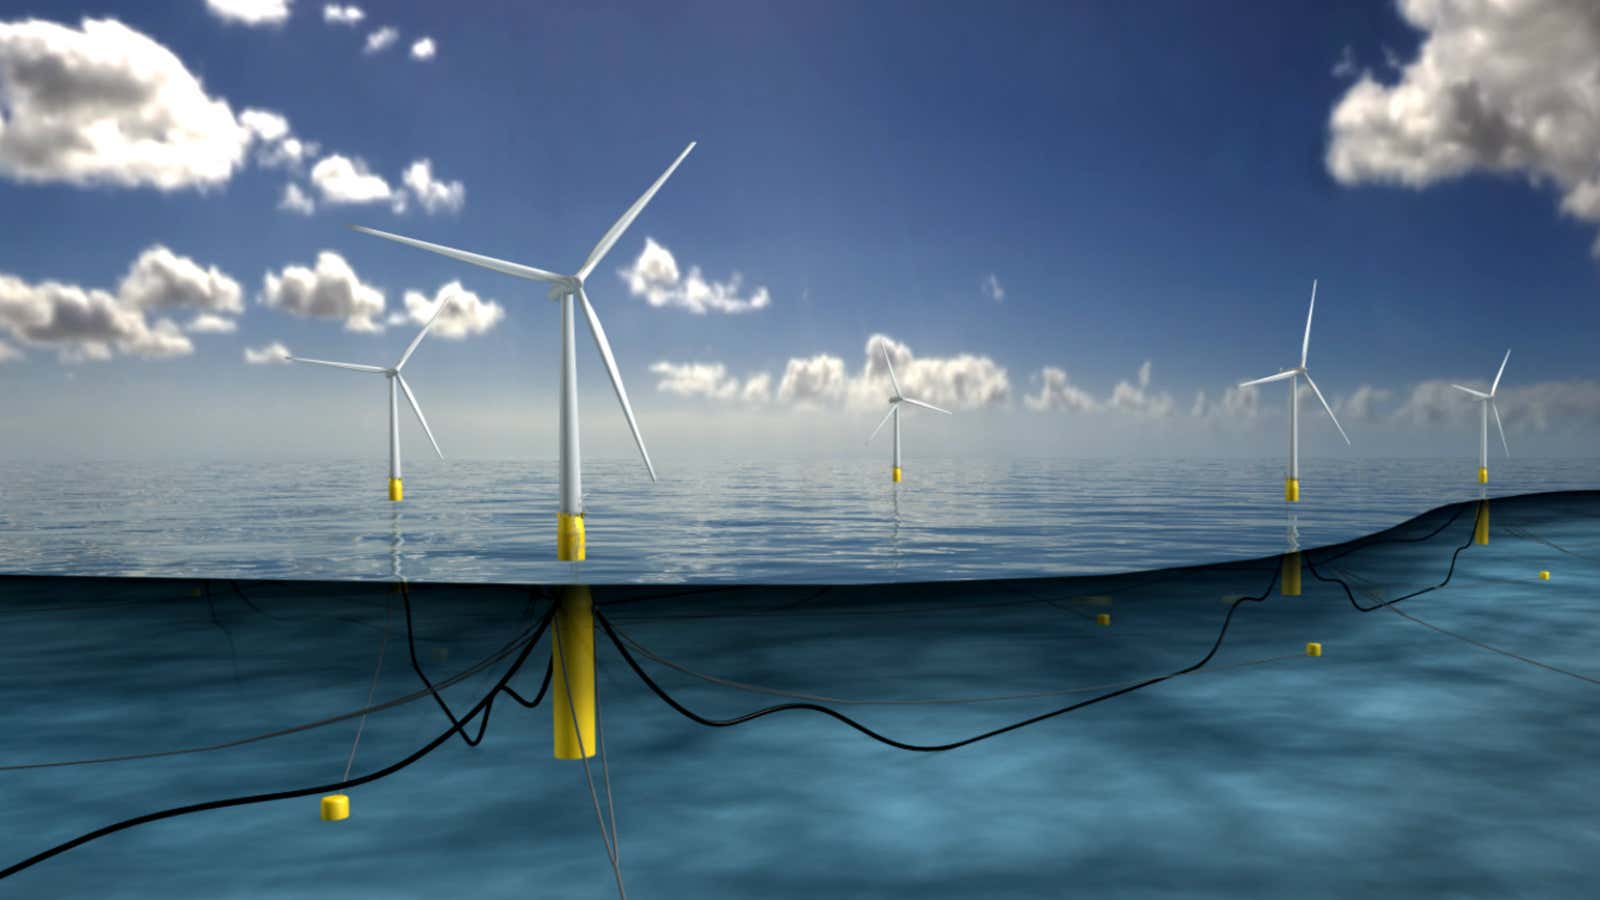 Floating turbines could be the future of wind power.